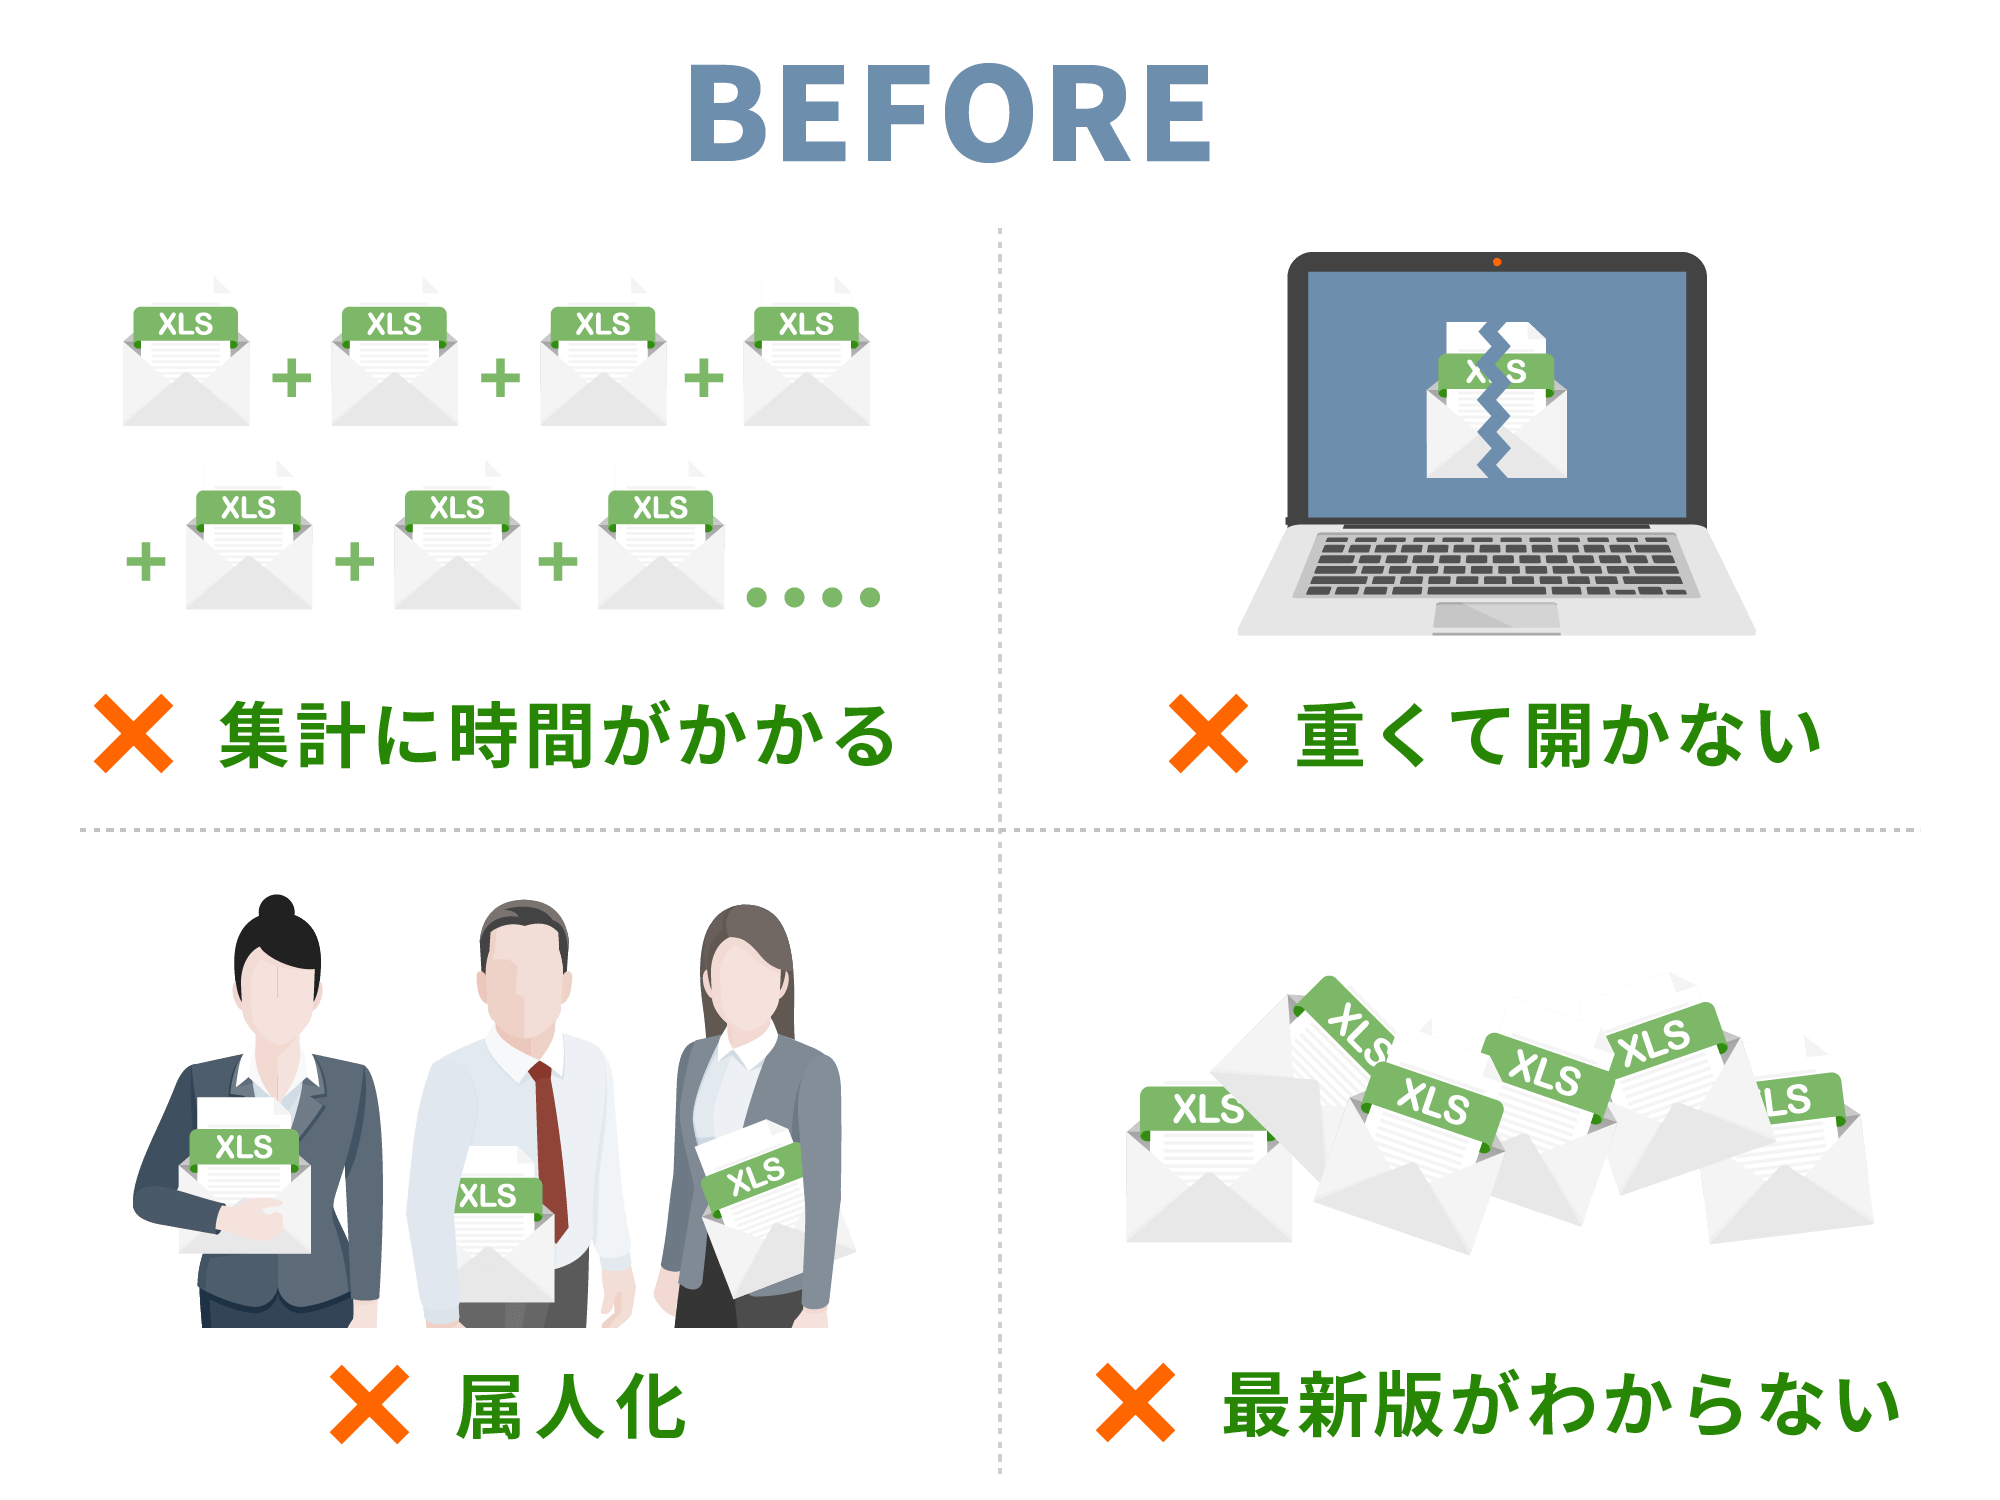 Excelを読み込むだけで、チームワークを向上させる業務システムを構築！